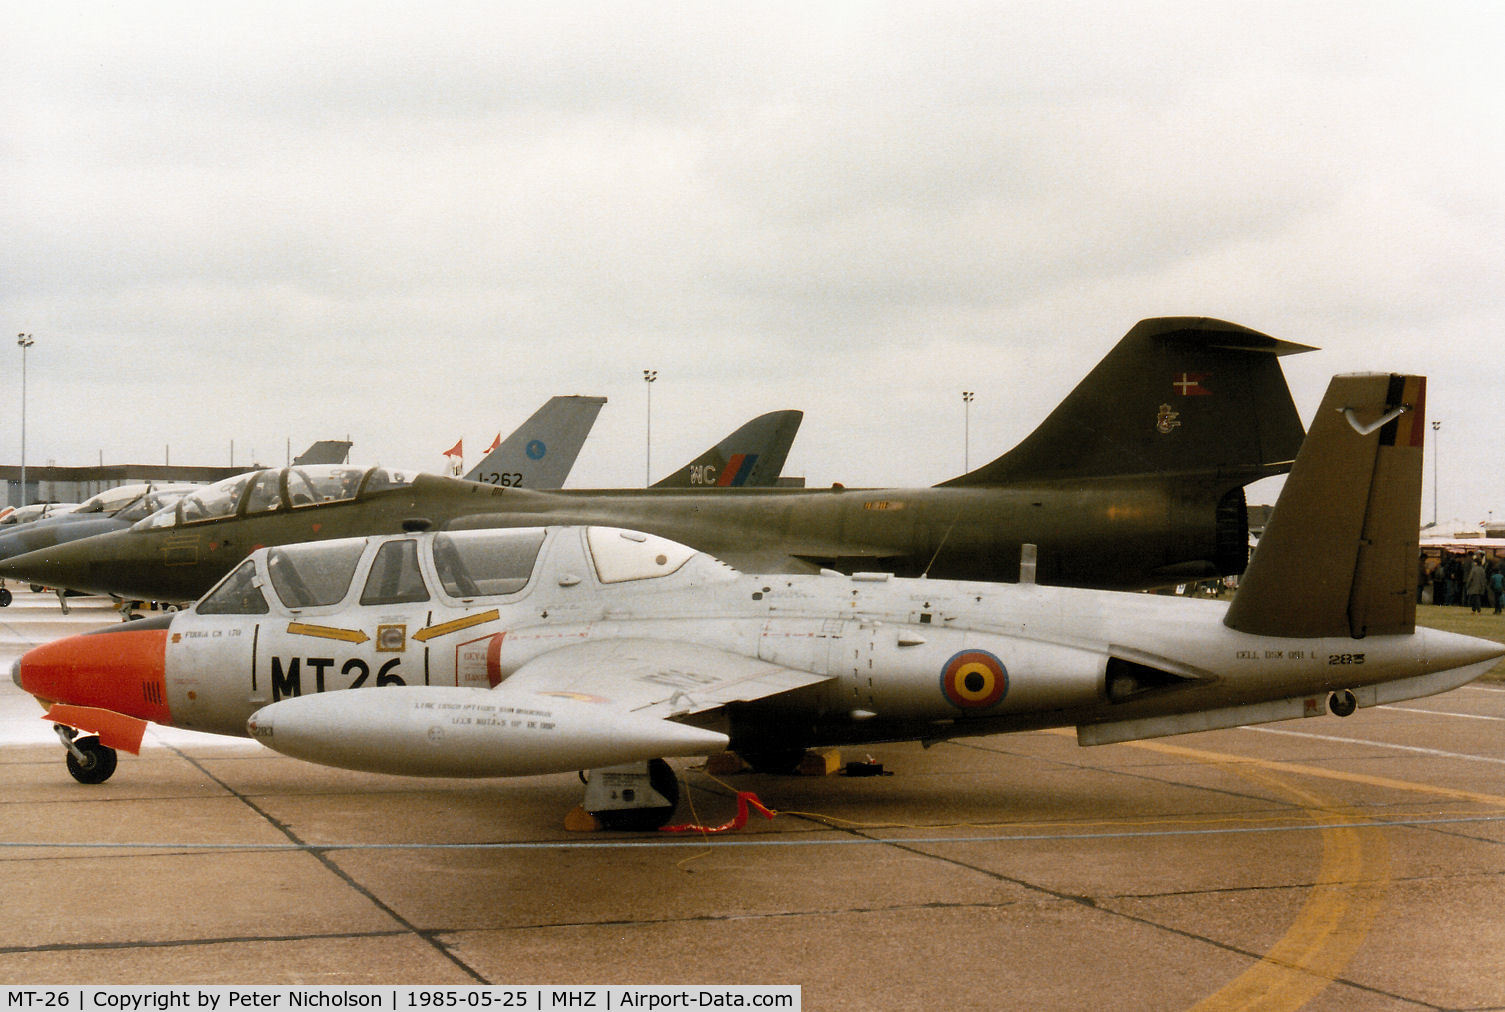 MT-26, Fouga CM-170R Magister C/N 283, Belgian Air Force CM-170R Magister on display at the 1985 RAF Mildenhall Air Fete.